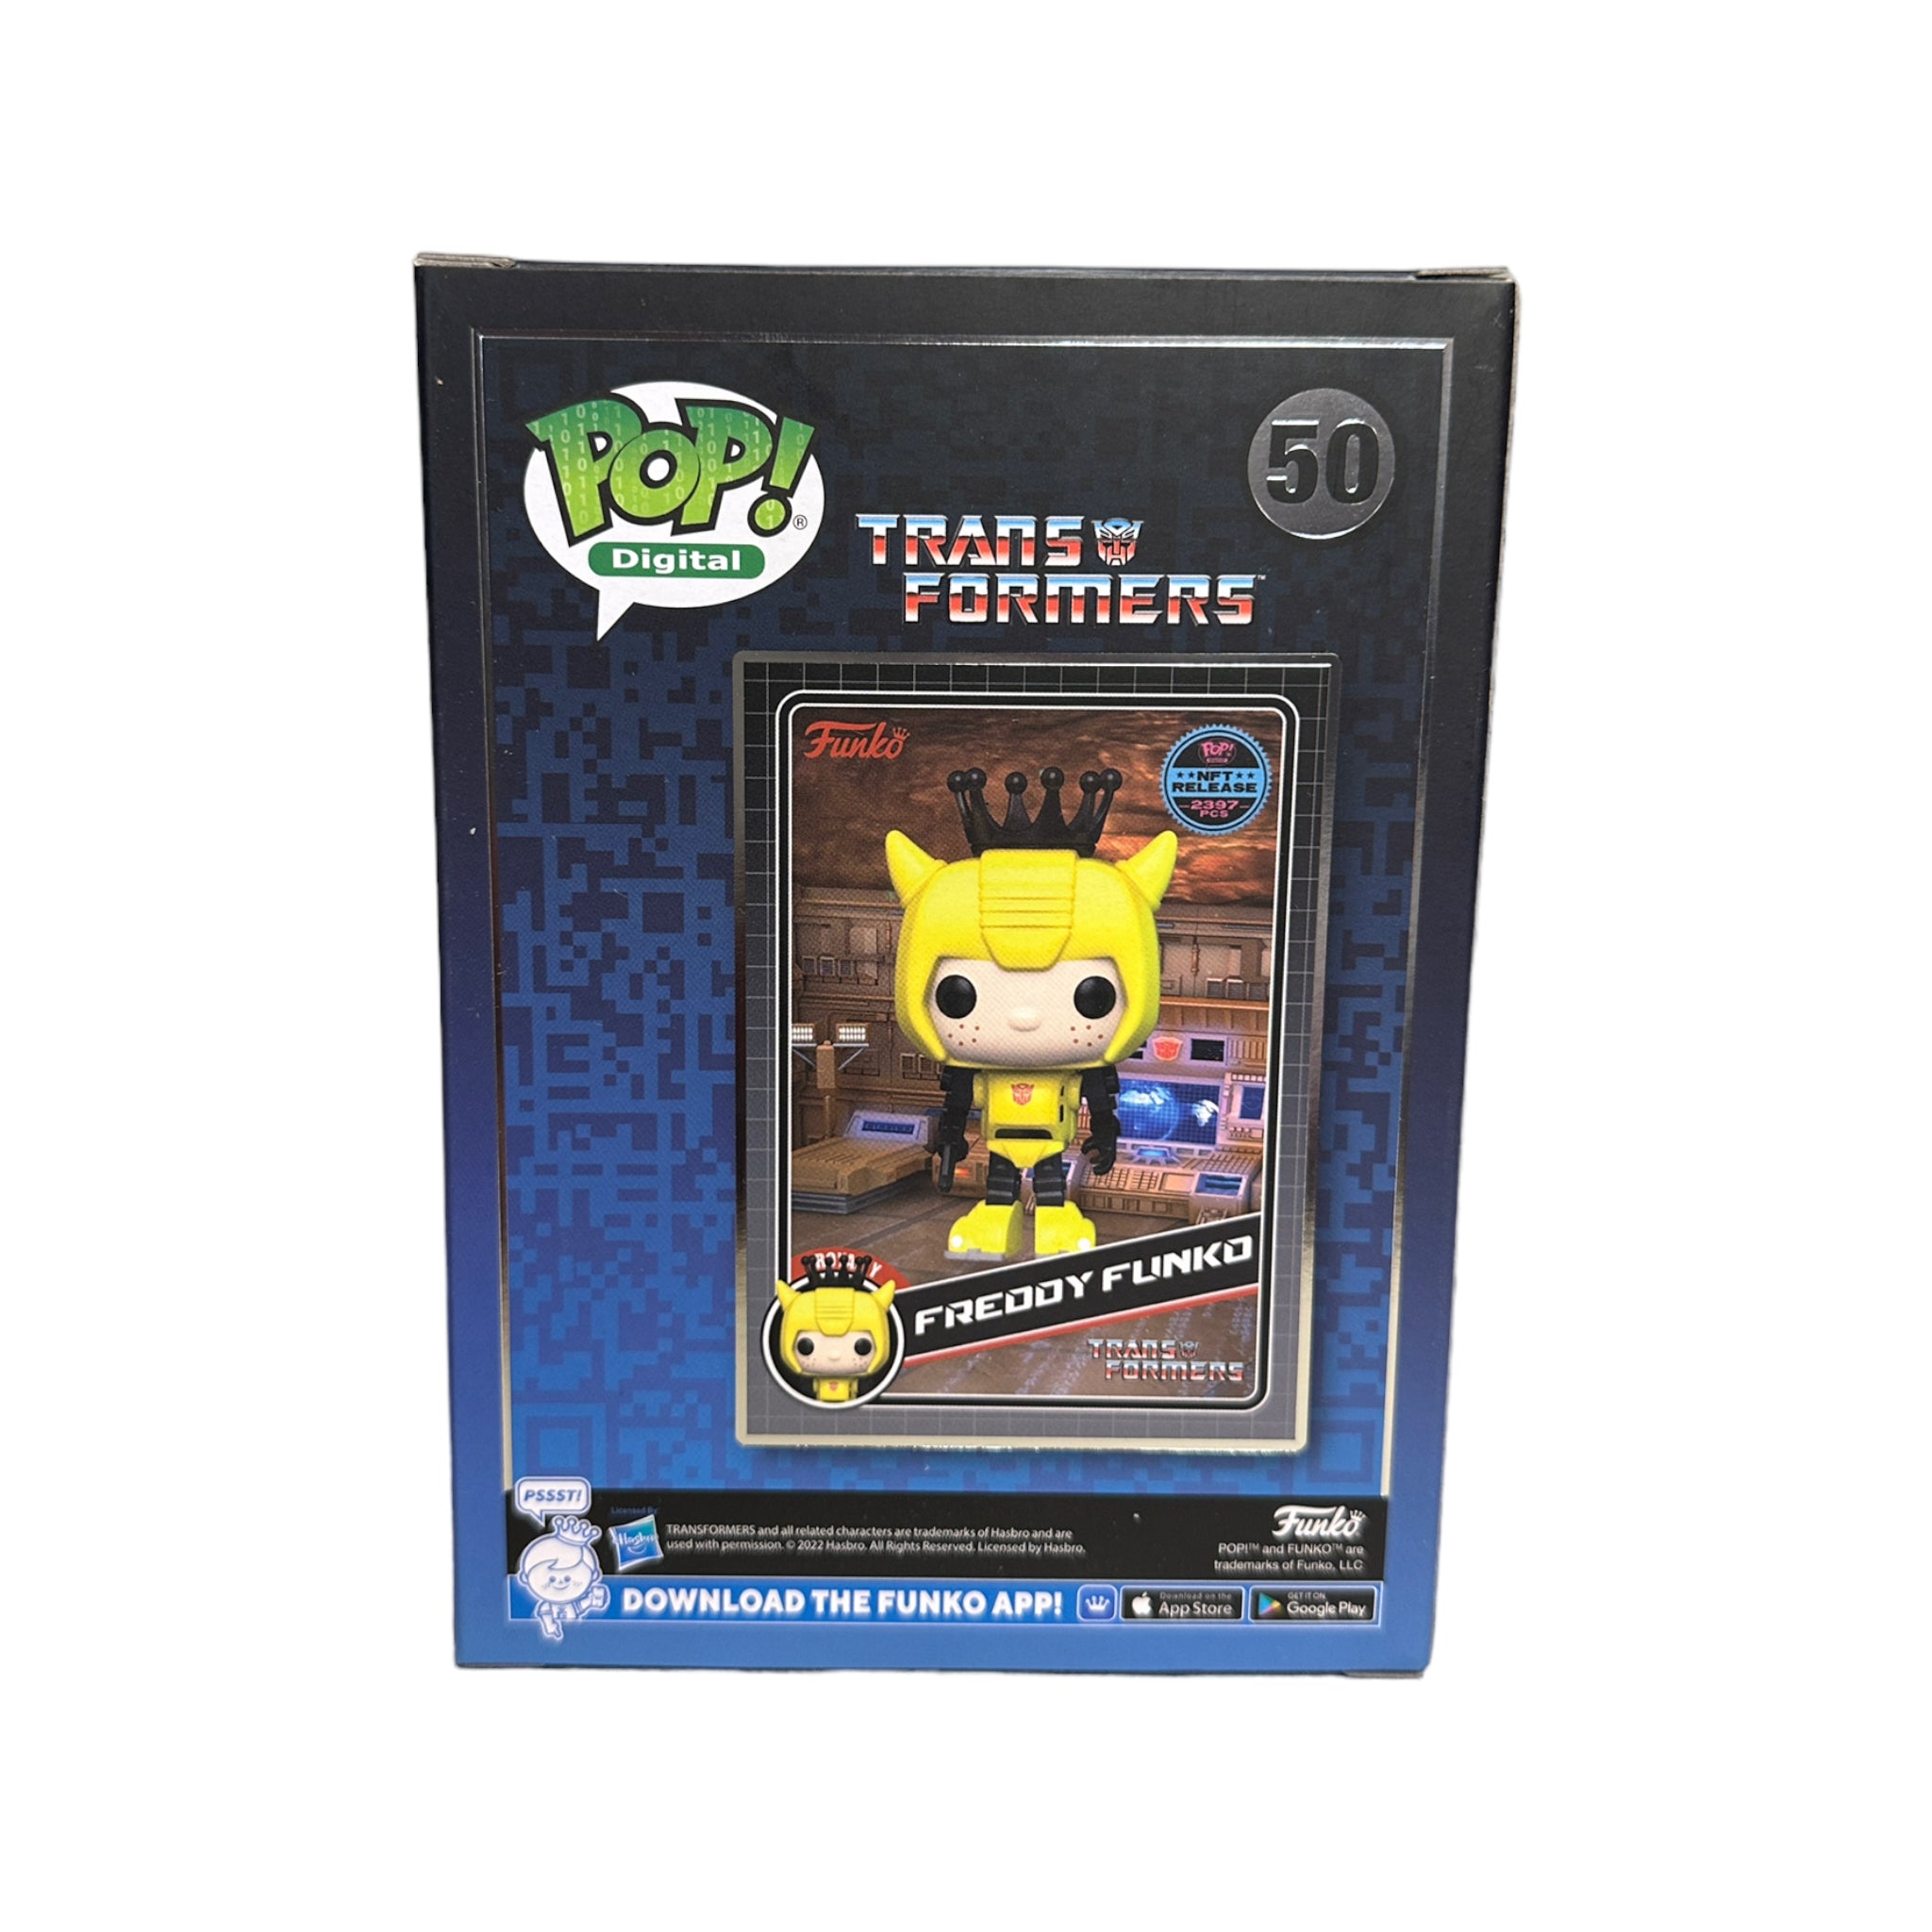 Freddy Funko as Bumblebee #50 Funko Pop! - Transformers - NFT Release Exclusive LE2397 Pcs - Condition 9.5/10